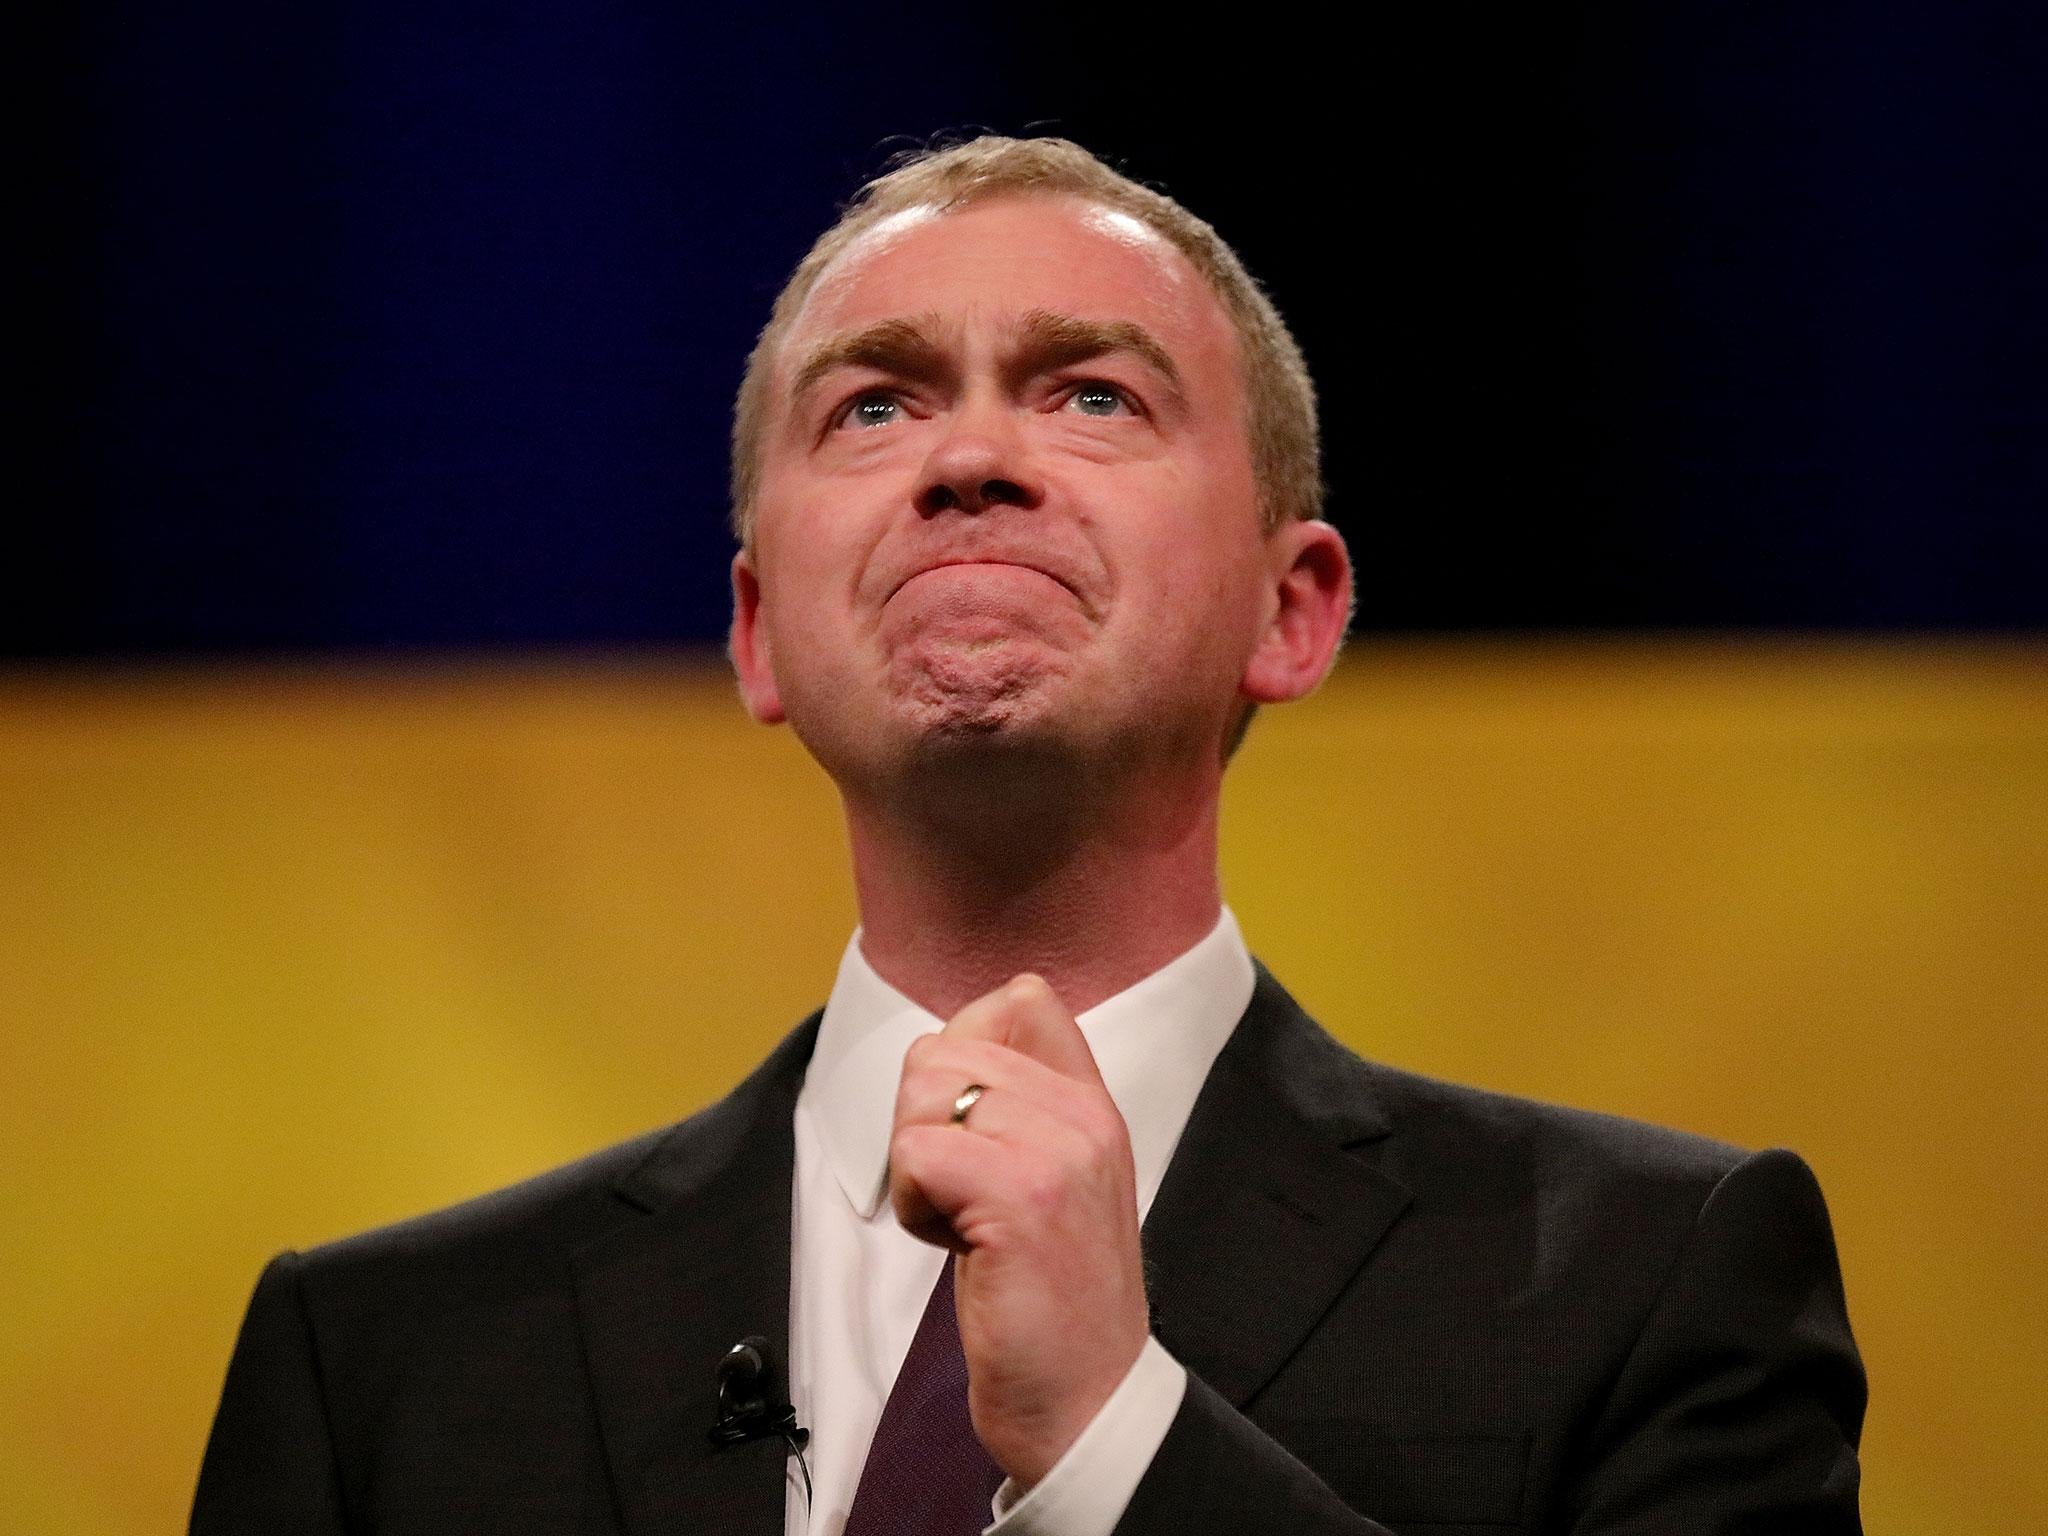 'Only the Liberal Democrats can prevent a Conservative majority,' Tim Farron says